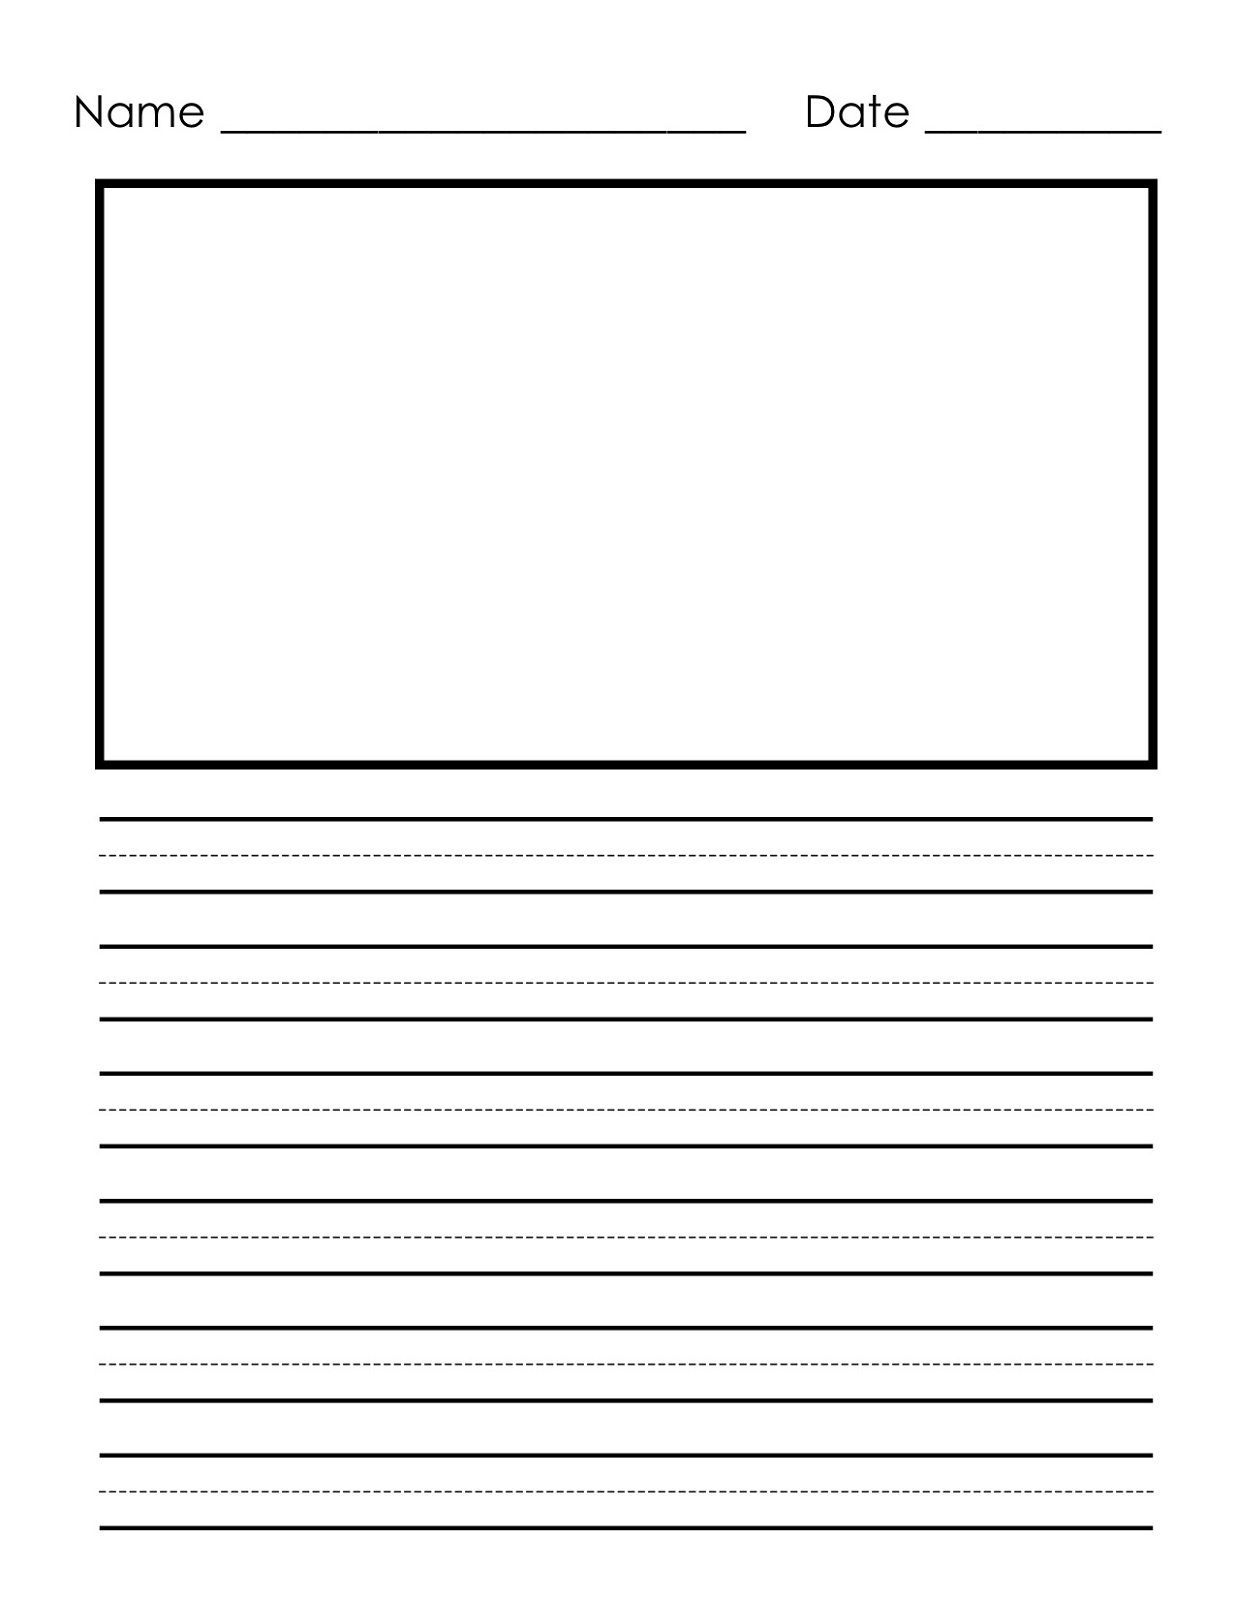 Elementary lined paper printable free with pink and orange border